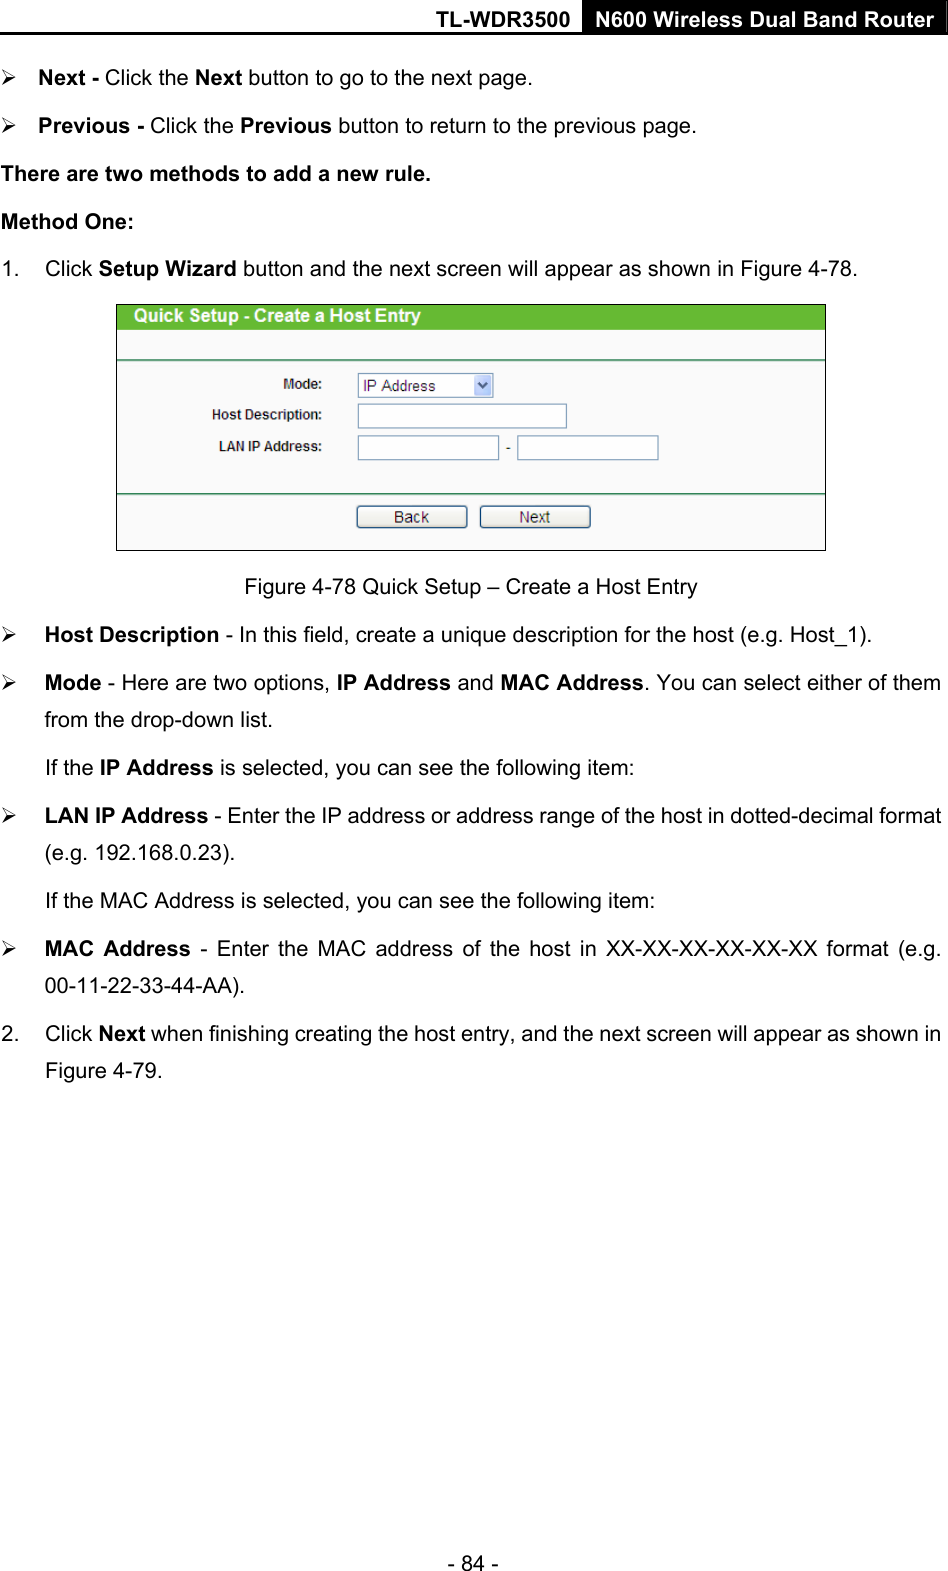 TL-WDR3500 N600 Wireless Dual Band Router - 84 -  Next - Click the Next button to go to the next page.  Previous - Click the Previous button to return to the previous page. There are two methods to add a new rule. Method One: 1. Click Setup Wizard button and the next screen will appear as shown in Figure 4-78.  Figure 4-78 Quick Setup – Create a Host Entry  Host Description - In this field, create a unique description for the host (e.g. Host_1).    Mode - Here are two options, IP Address and MAC Address. You can select either of them from the drop-down list.   If the IP Address is selected, you can see the following item:  LAN IP Address - Enter the IP address or address range of the host in dotted-decimal format (e.g. 192.168.0.23).   If the MAC Address is selected, you can see the following item:  MAC Address - Enter the MAC address of the host in XX-XX-XX-XX-XX-XX format (e.g. 00-11-22-33-44-AA).  2. Click Next when finishing creating the host entry, and the next screen will appear as shown in Figure 4-79. 